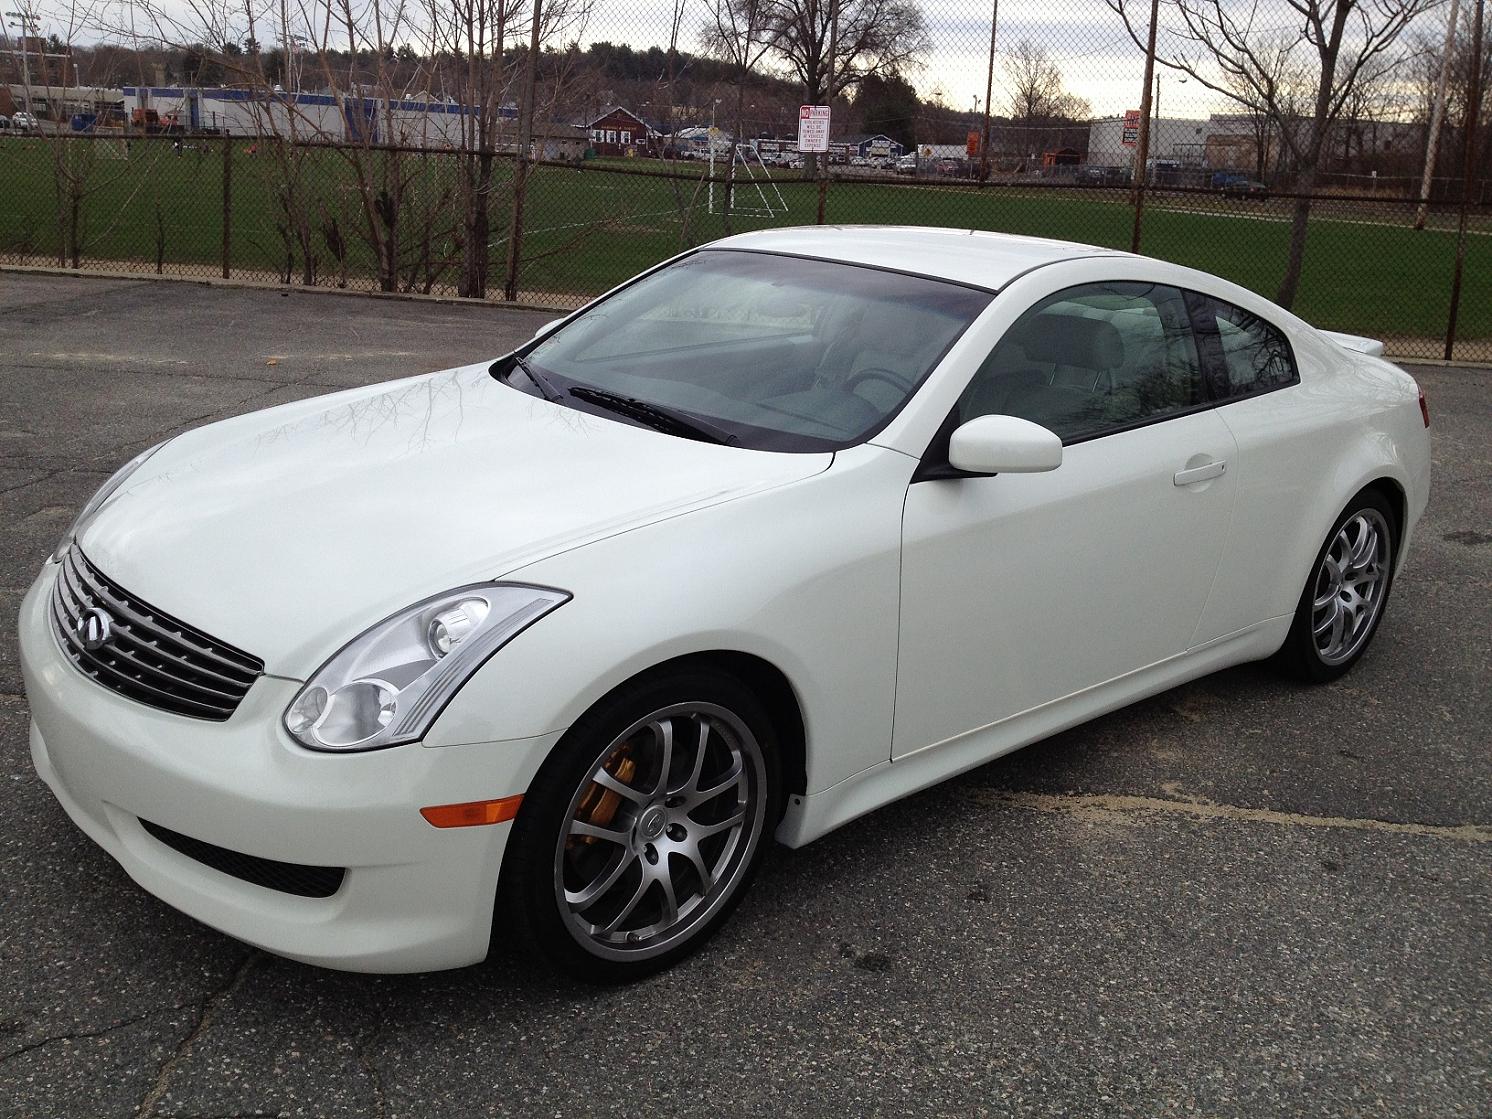 G35 Coupe 6mt.